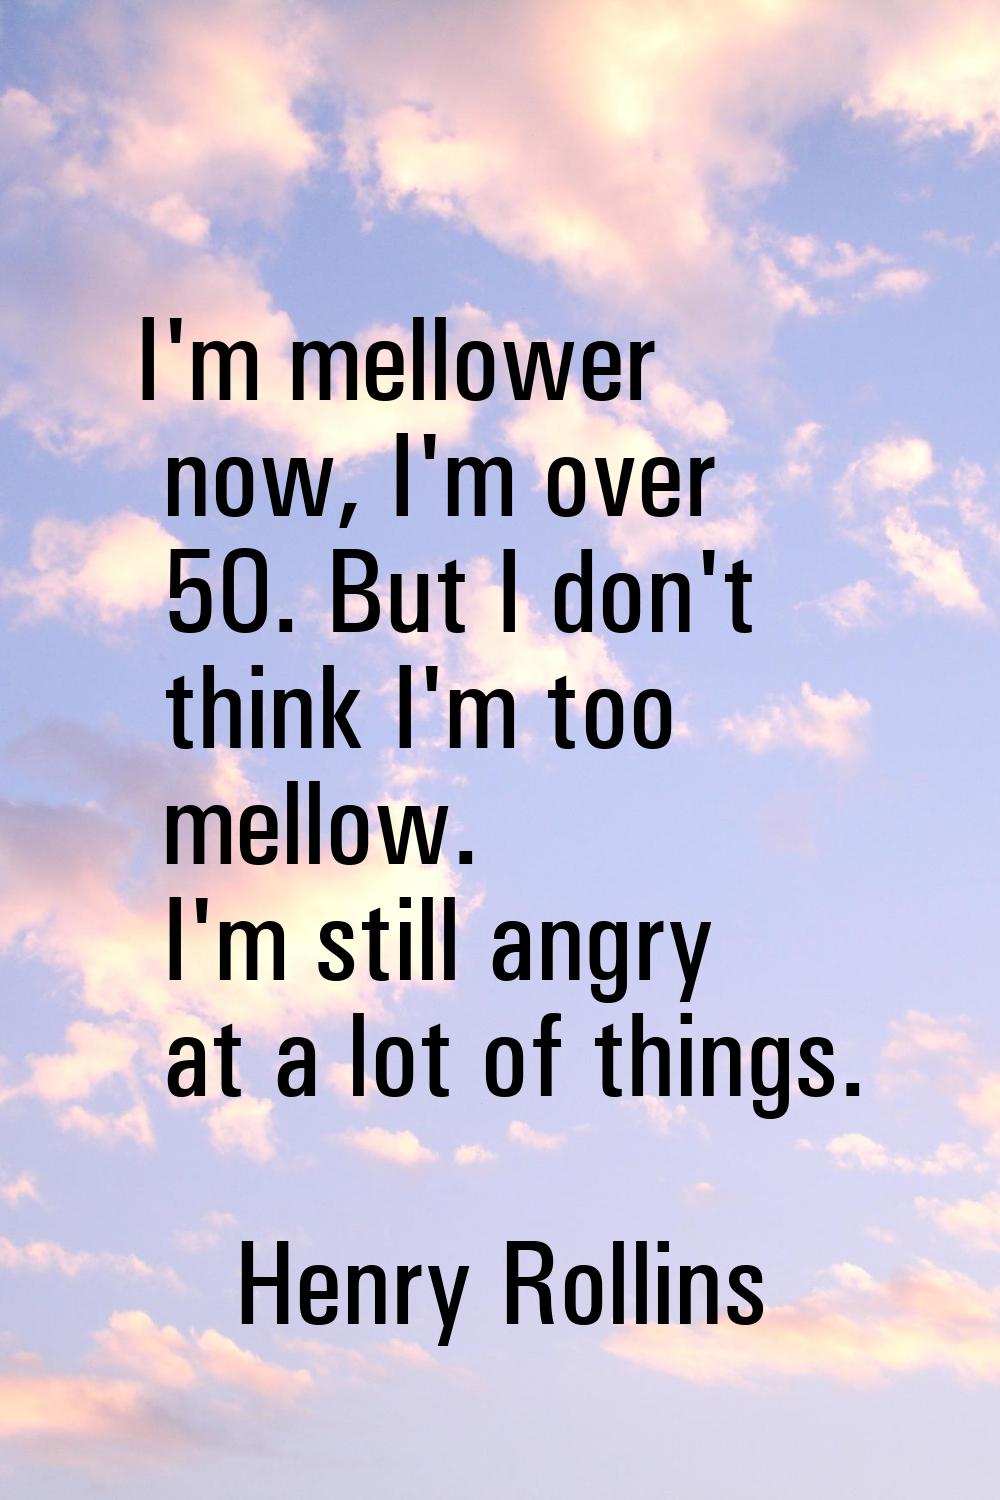 I'm mellower now, I'm over 50. But I don't think I'm too mellow. I'm still angry at a lot of things